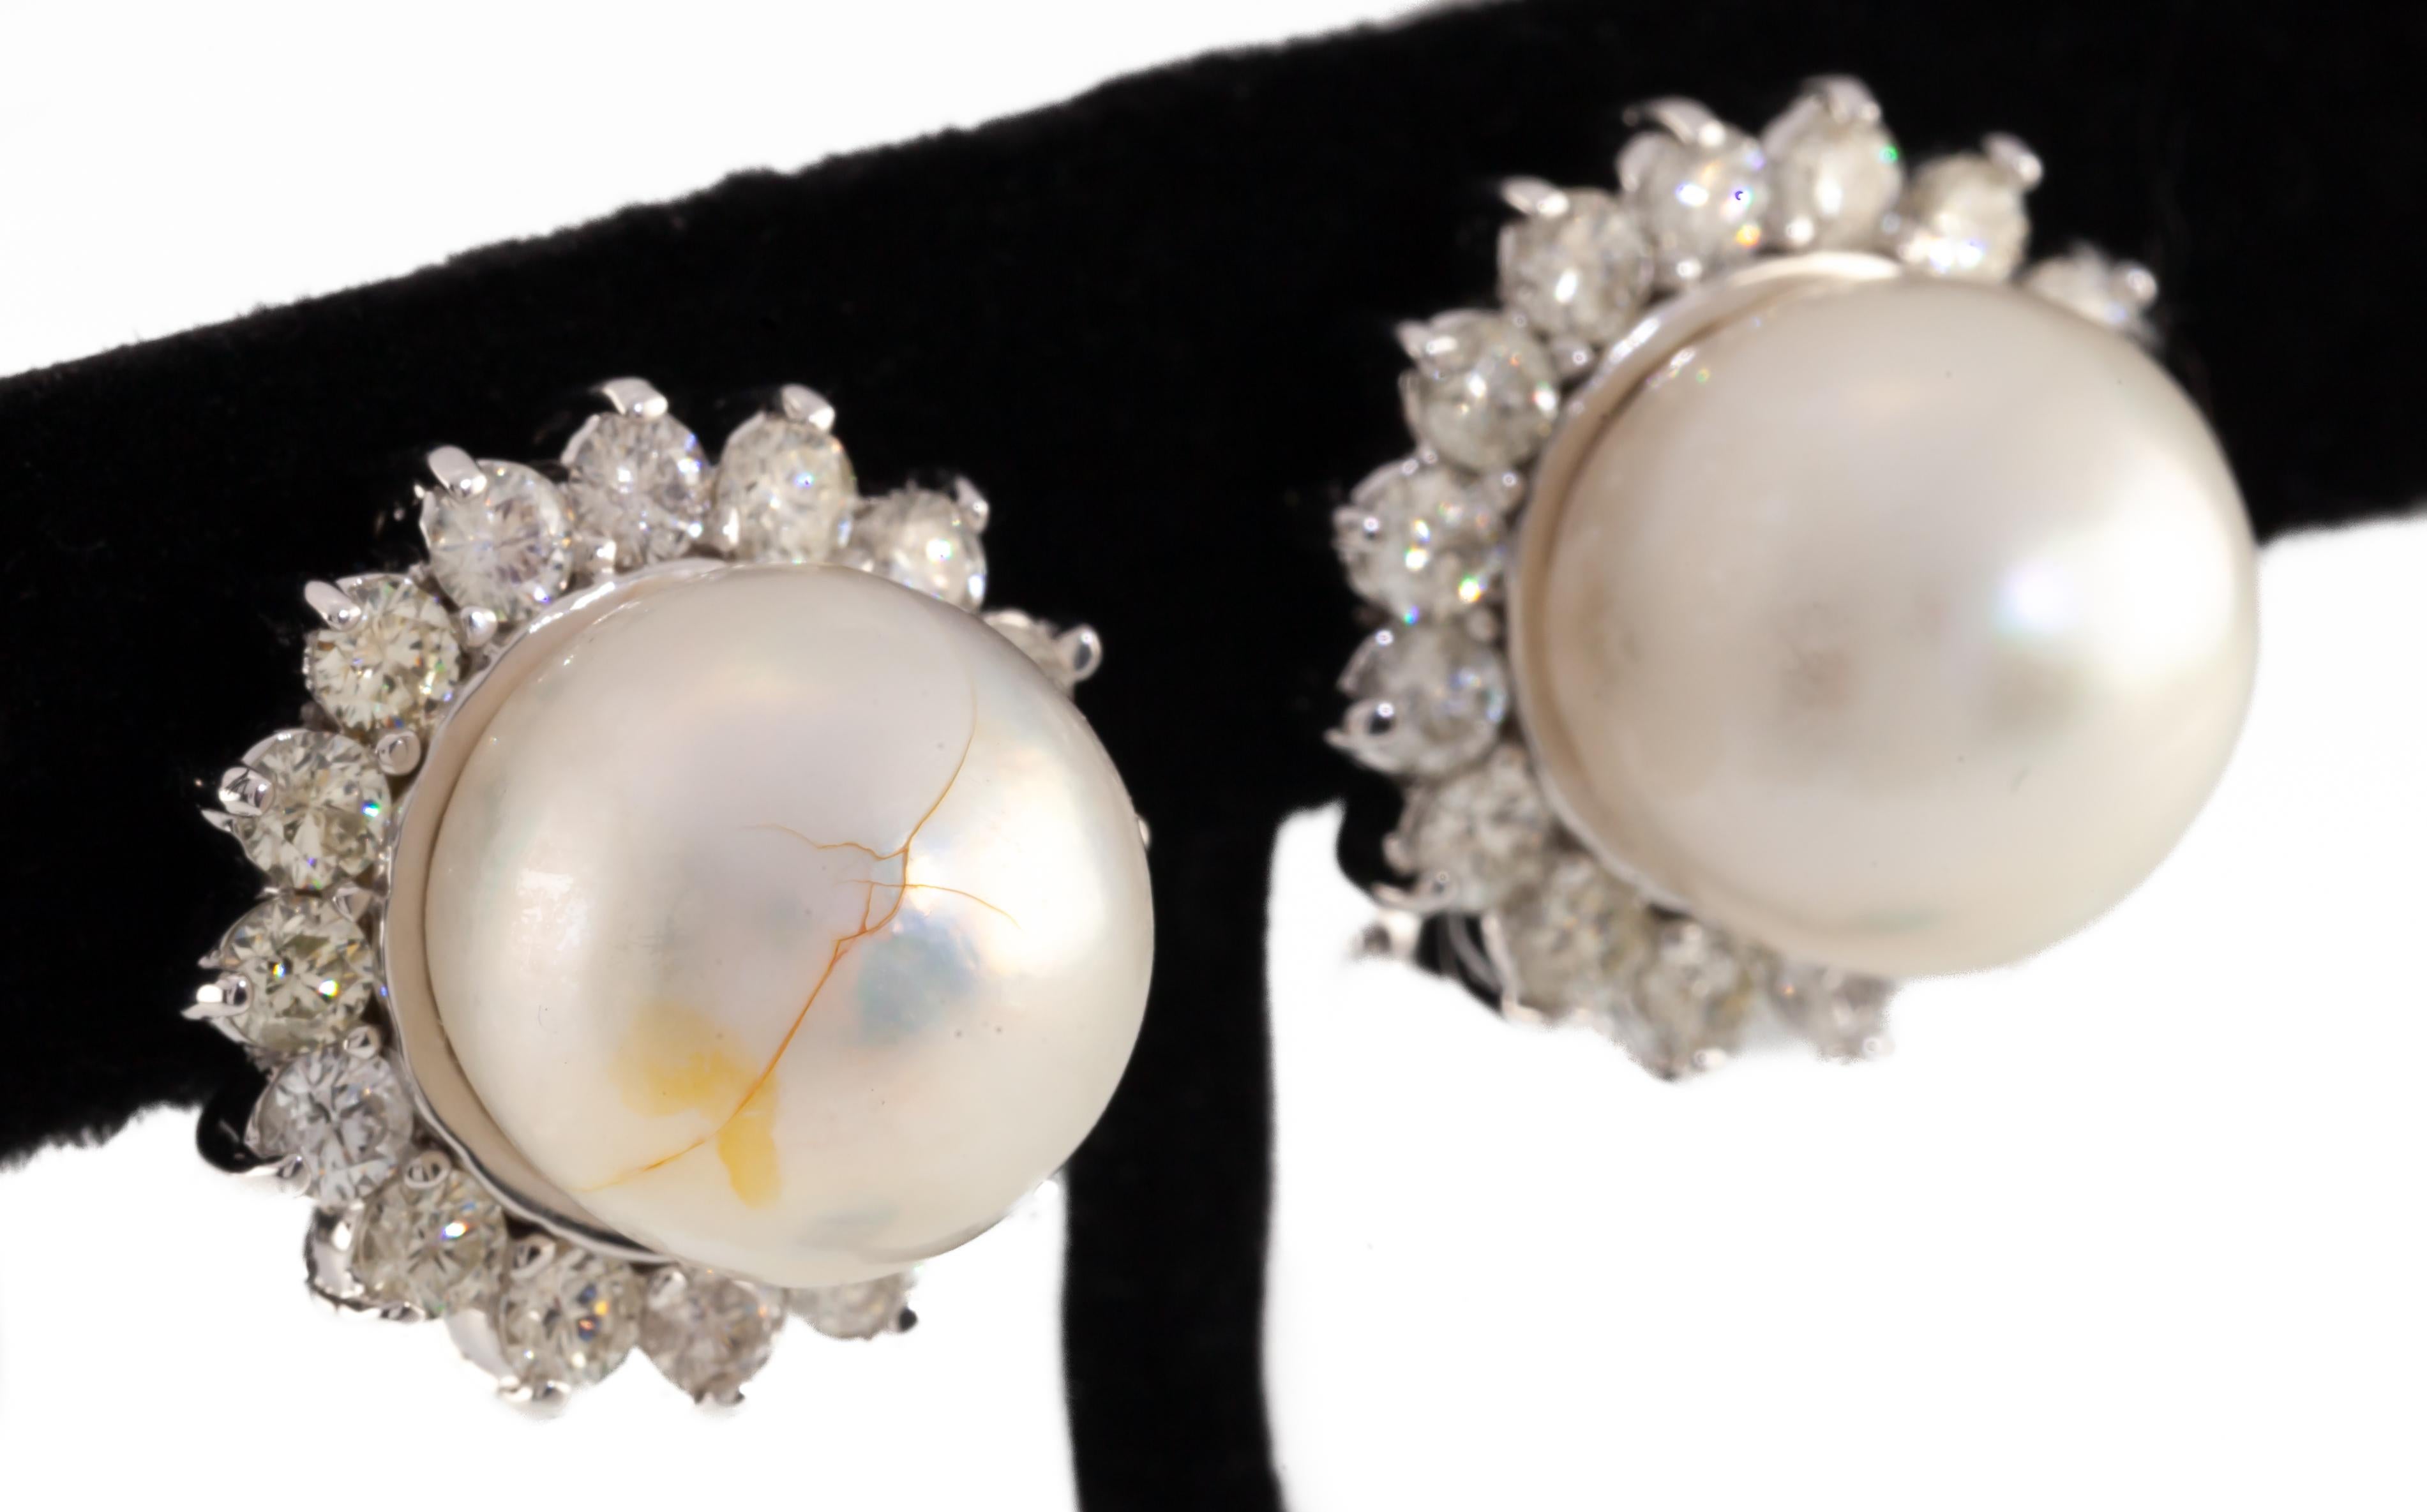 14k White Gold South Sea Cultured Pearl Earring Studs with Diamond Bezel & Cert In Fair Condition For Sale In Sherman Oaks, CA